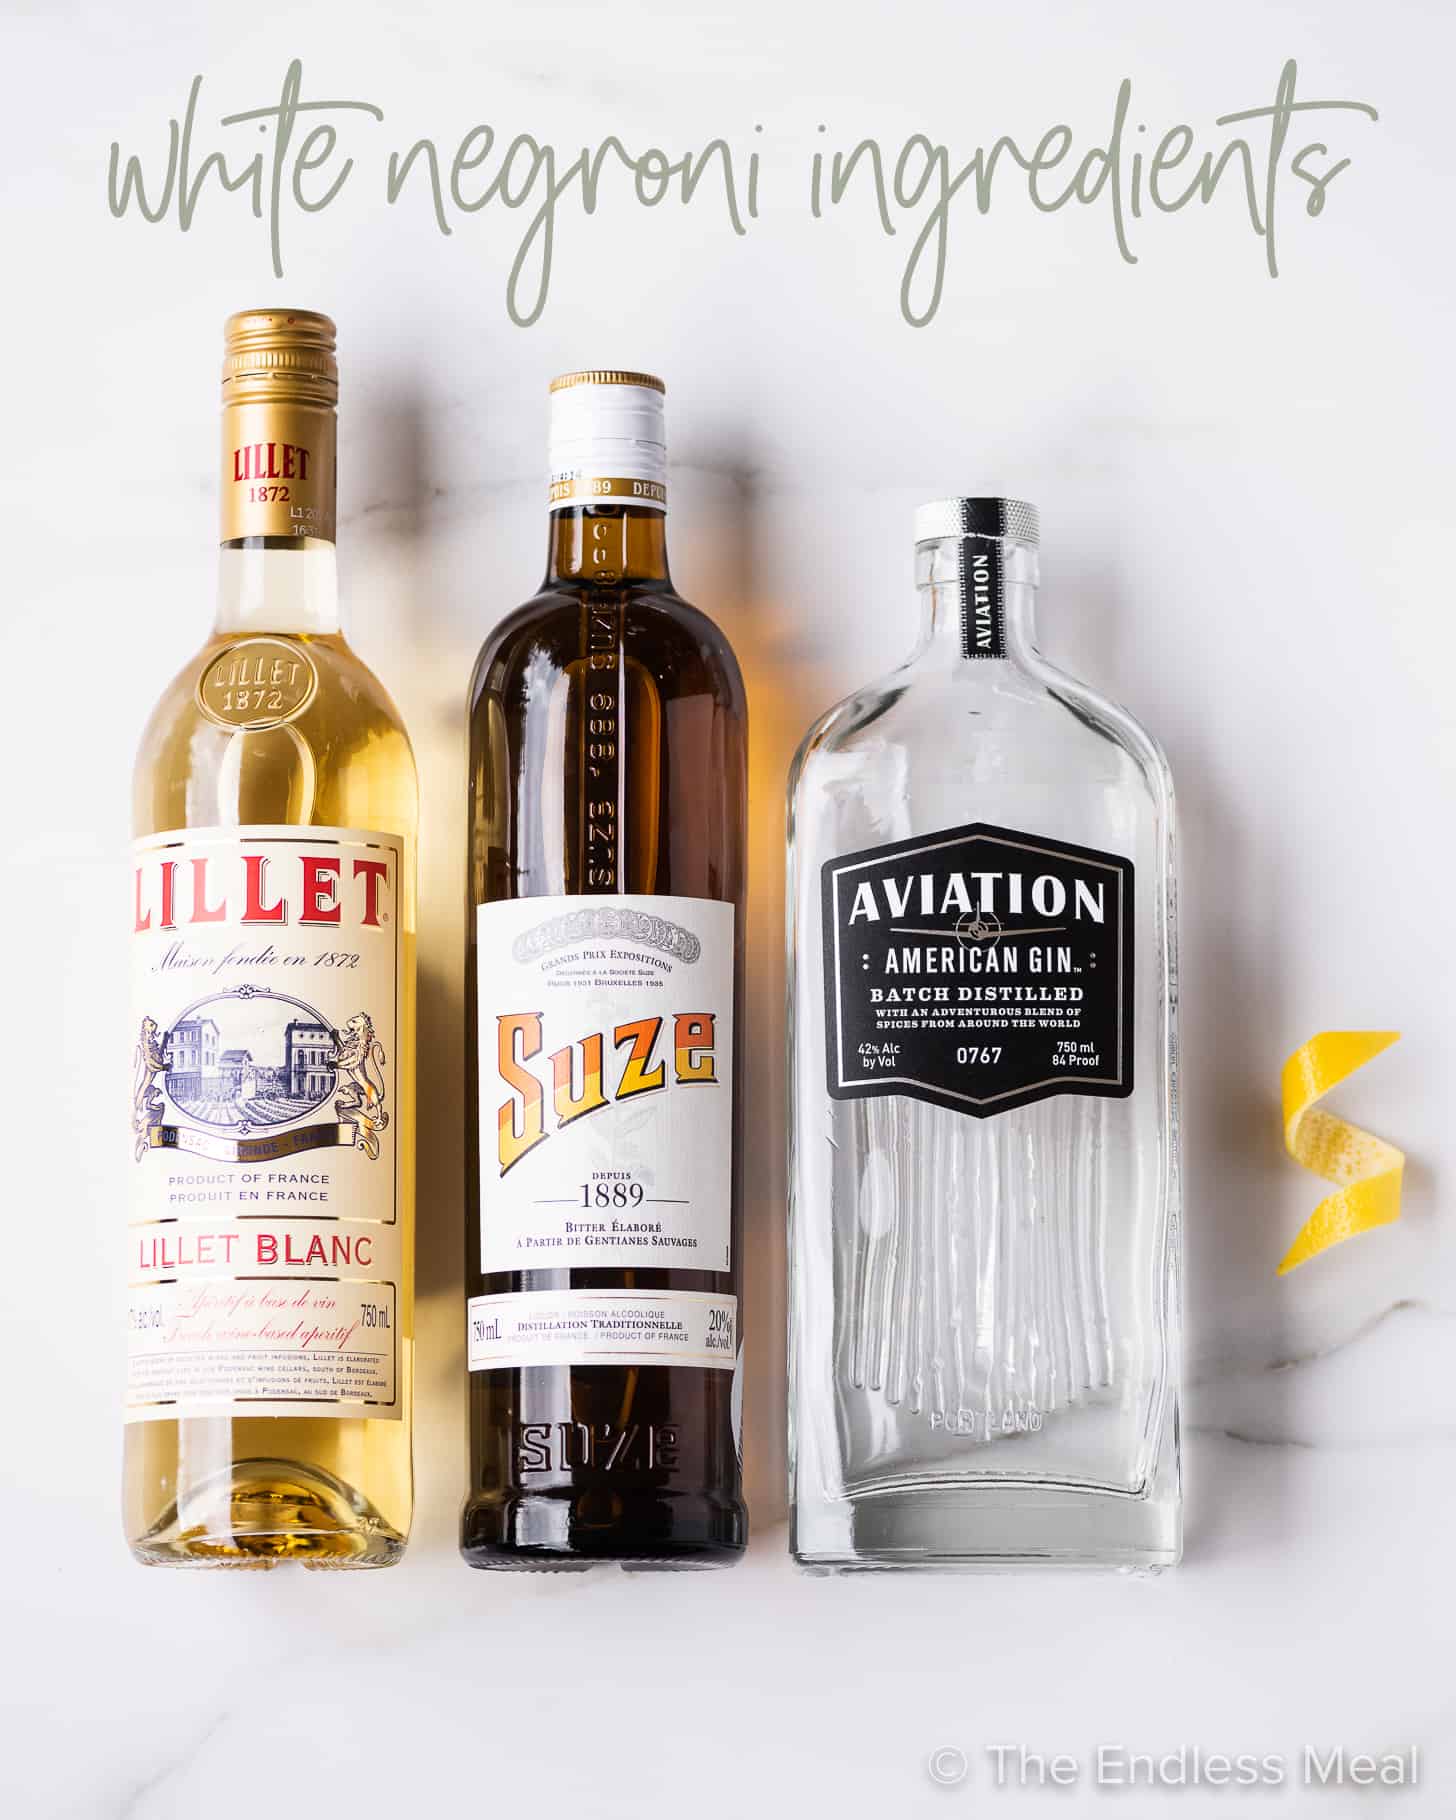 The ingredients to make a white negroni - Lillet, Suze, and gin